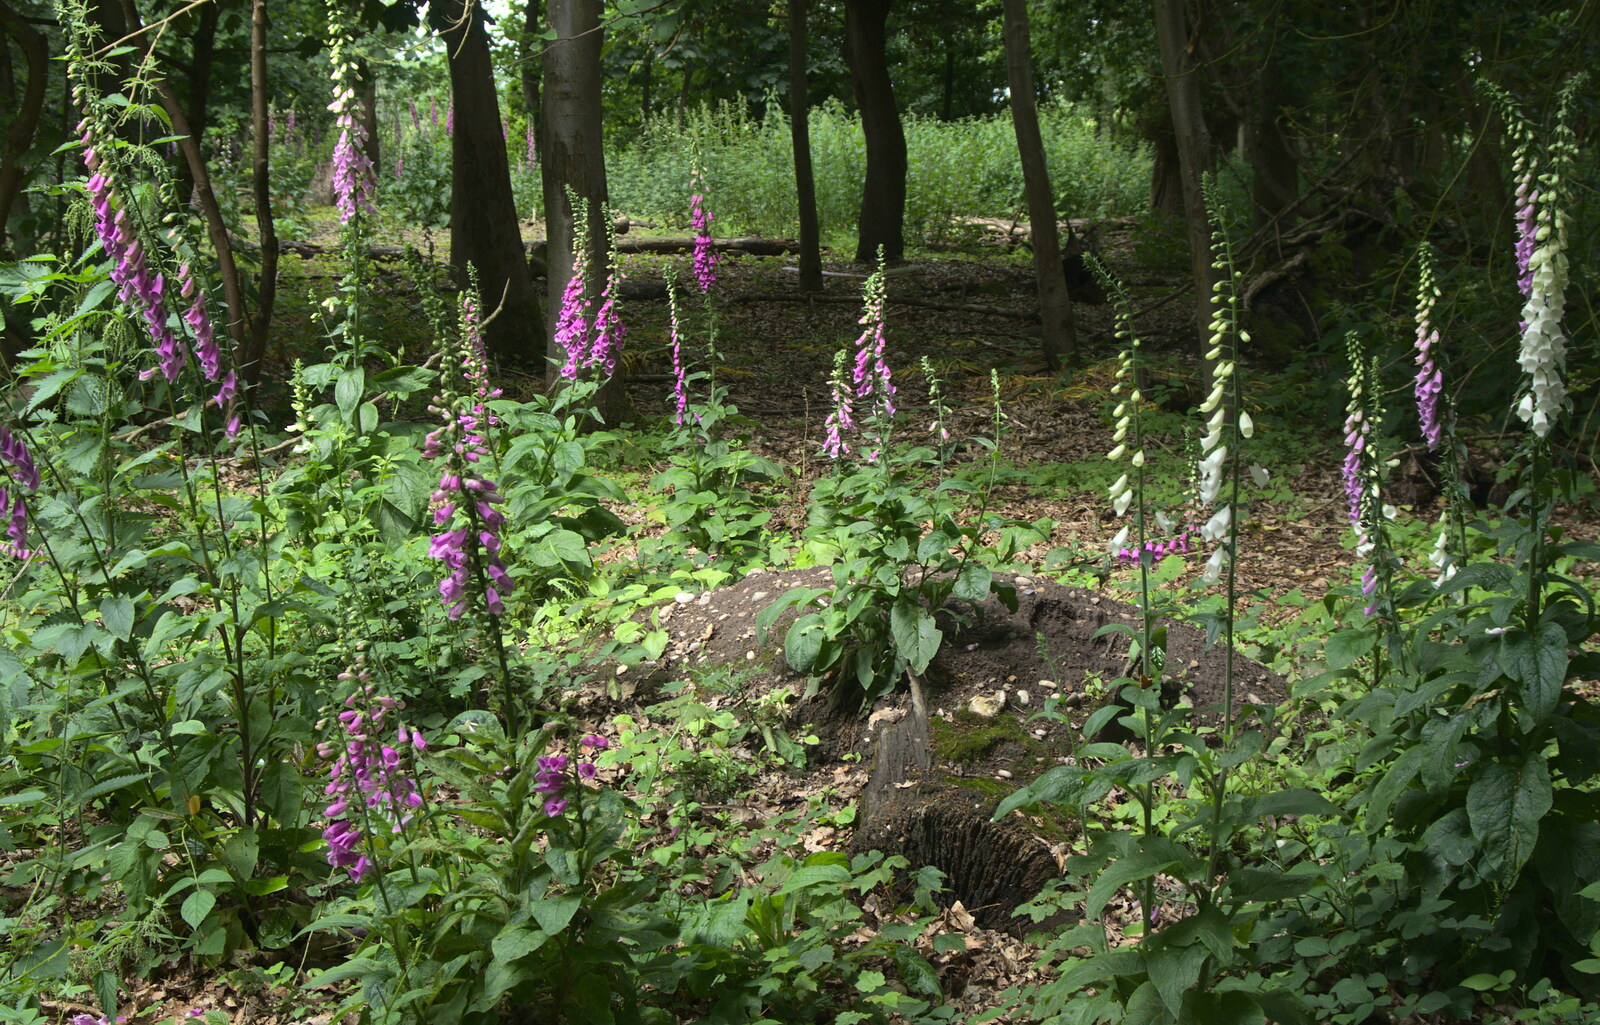 A cluster of Foxgloves from Petrol Station Destruction, and a Cliff House Camping Trip, Southwark and Dunwich, Suffolk - 30th June 2013